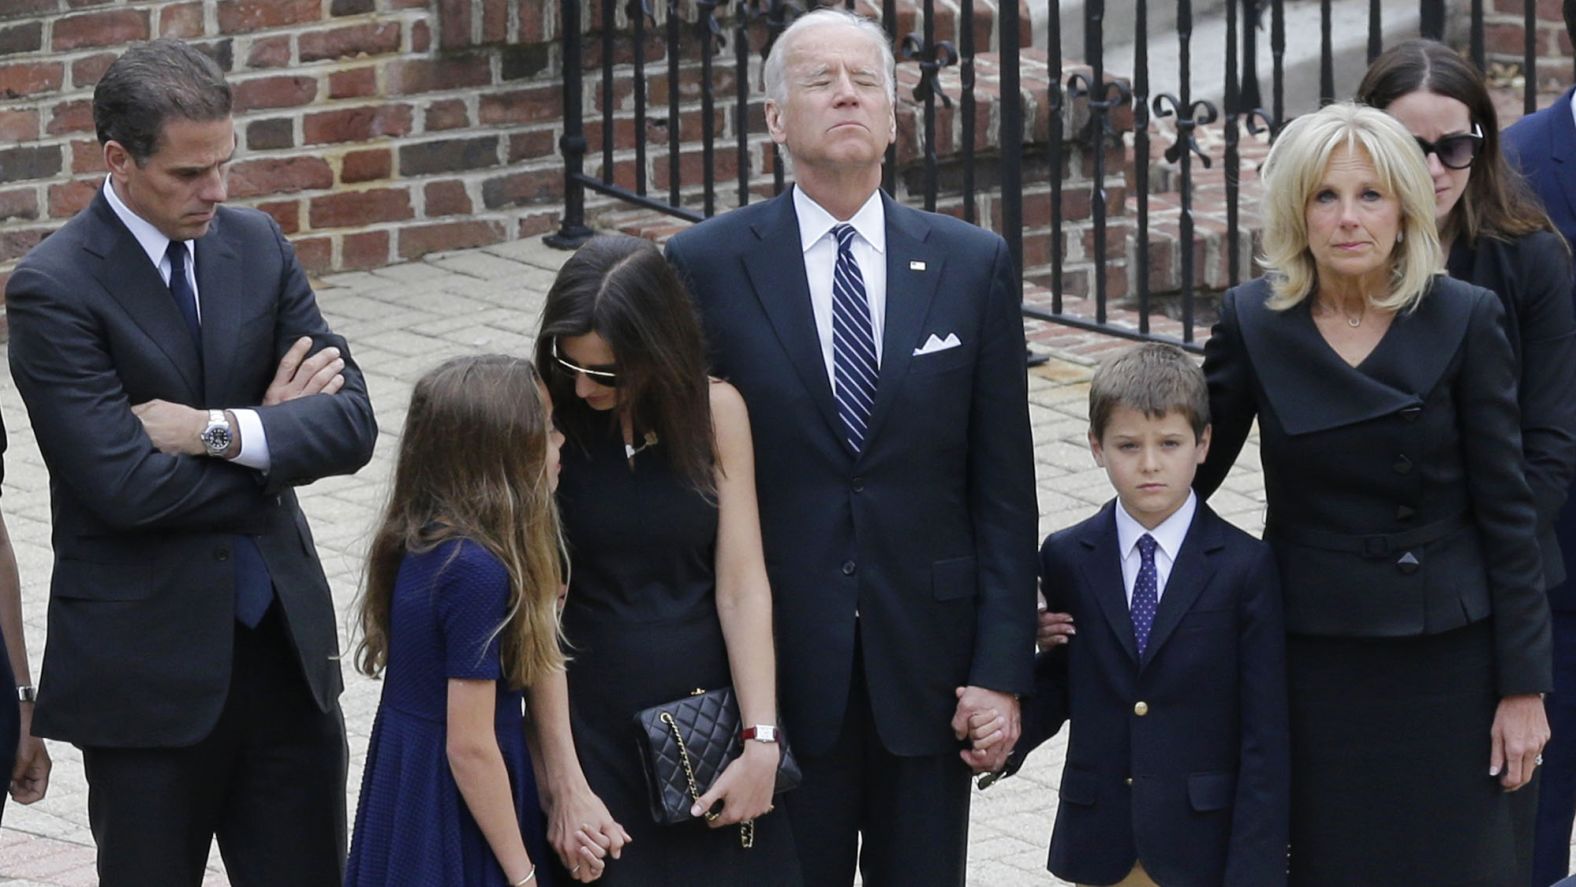 Biden pauses with his family as they enter a visitation for his son, former Delaware Attorney General Beau Biden, in June 2015. Biden's eldest son <a href="index.php?page=&url=http%3A%2F%2Fwww.cnn.com%2F2015%2F06%2F04%2Fpolitics%2Fgallery%2Fbeau-biden-wake%2Findex.html" target="_blank">died at the age of 46</a> after a battle with brain cancer.